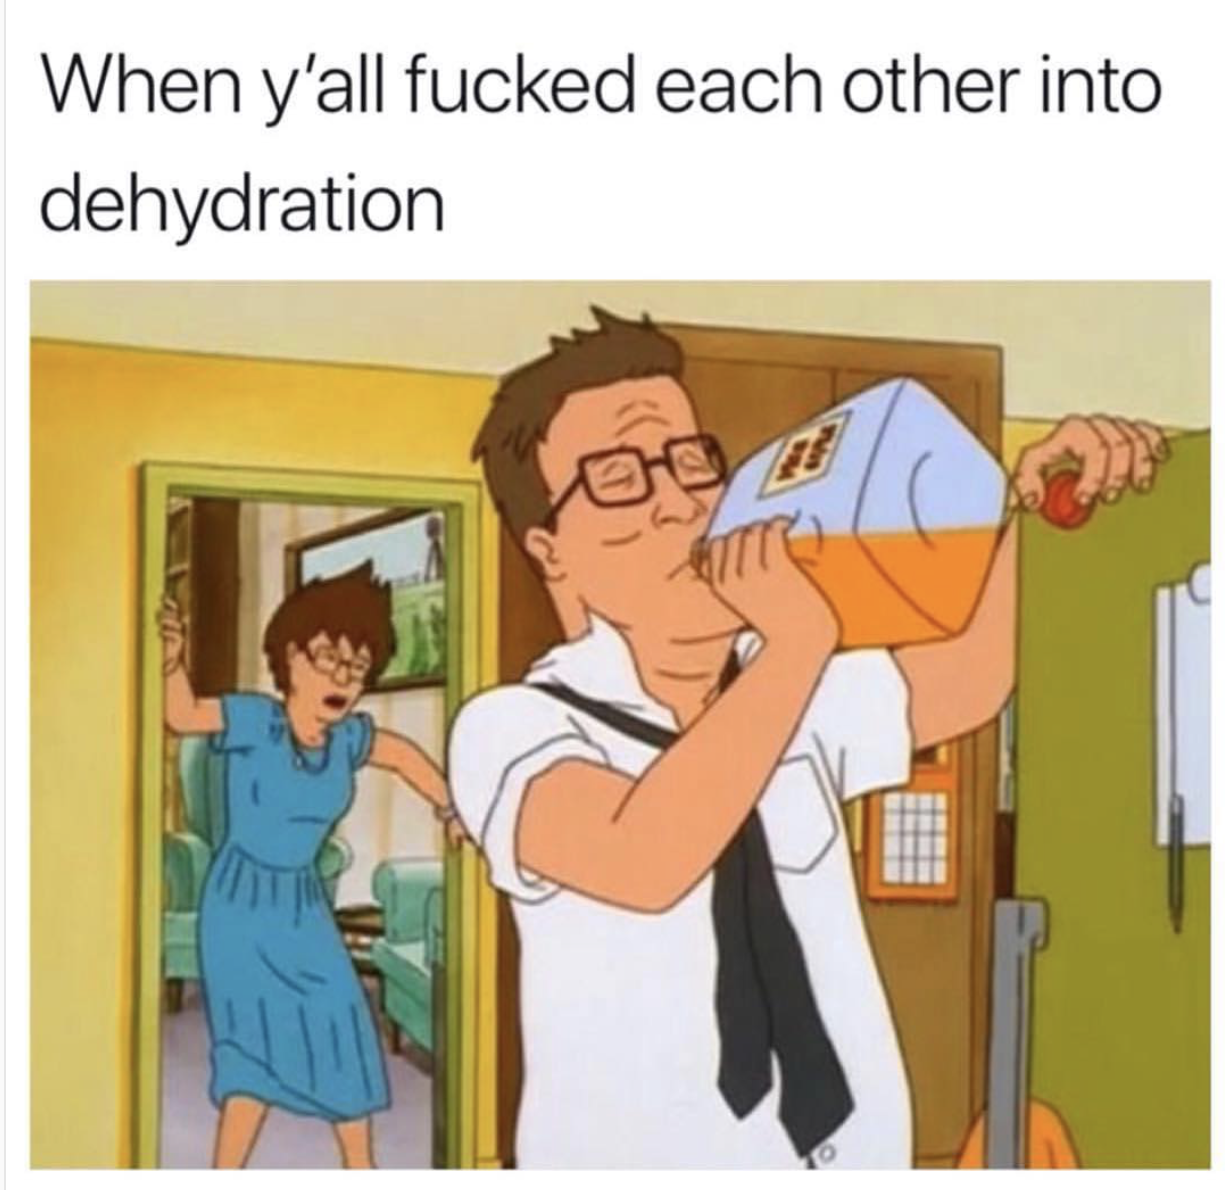 you fuck each other into dehydration meme - When y'all fucked each other into dehydration